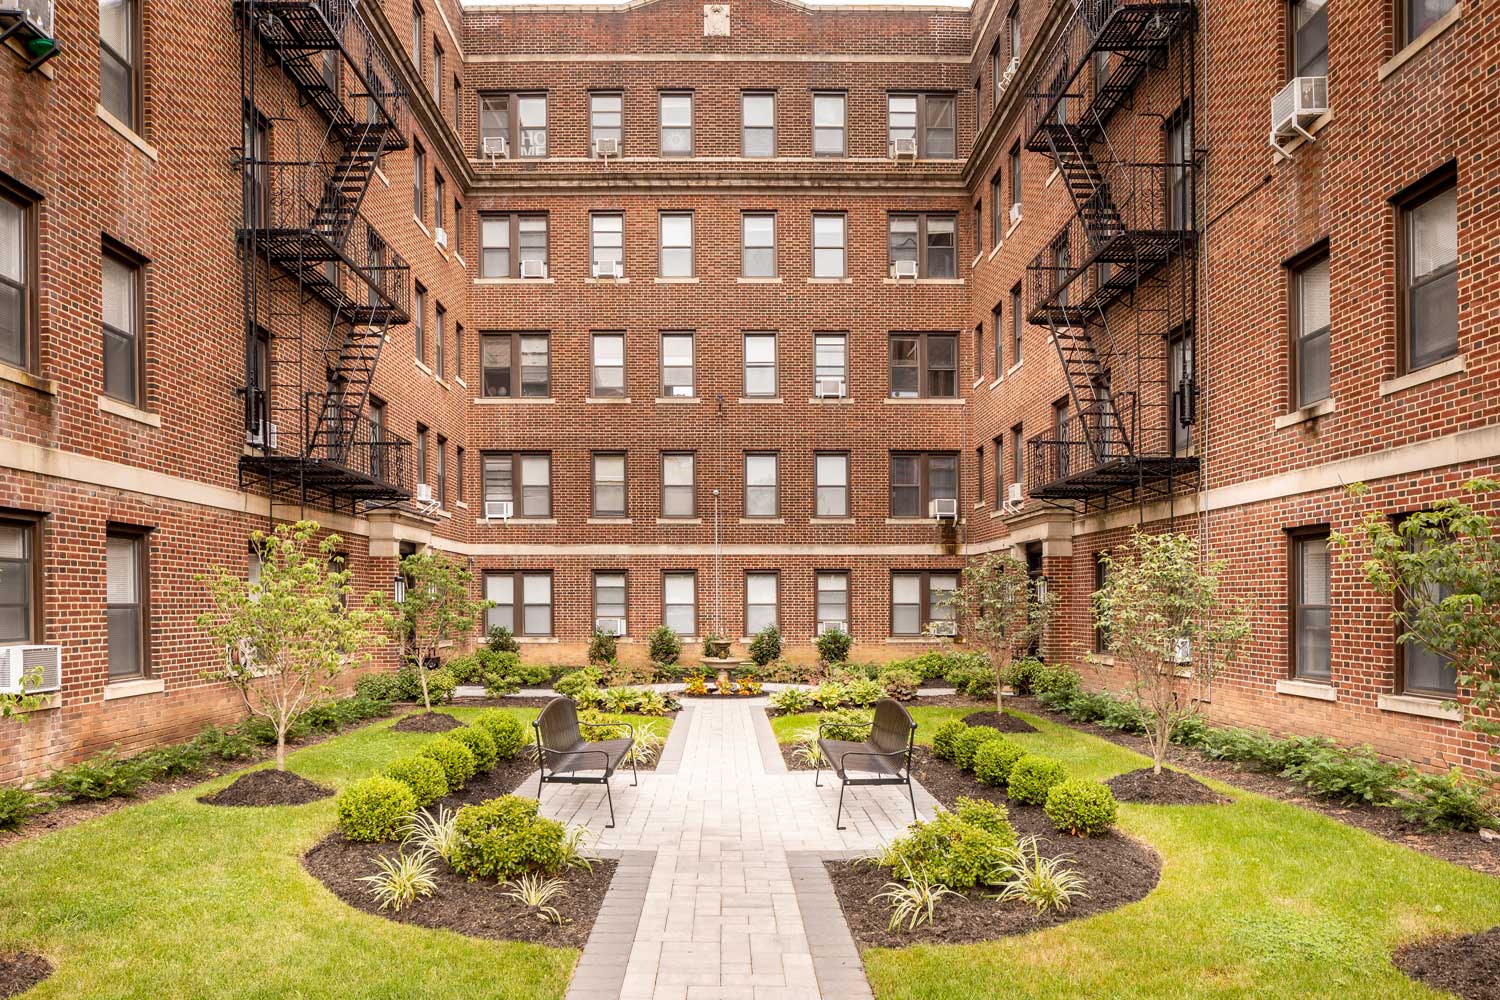 Spacious Apartments at Montclair Gardens Apartments in Montclair, New Jersey